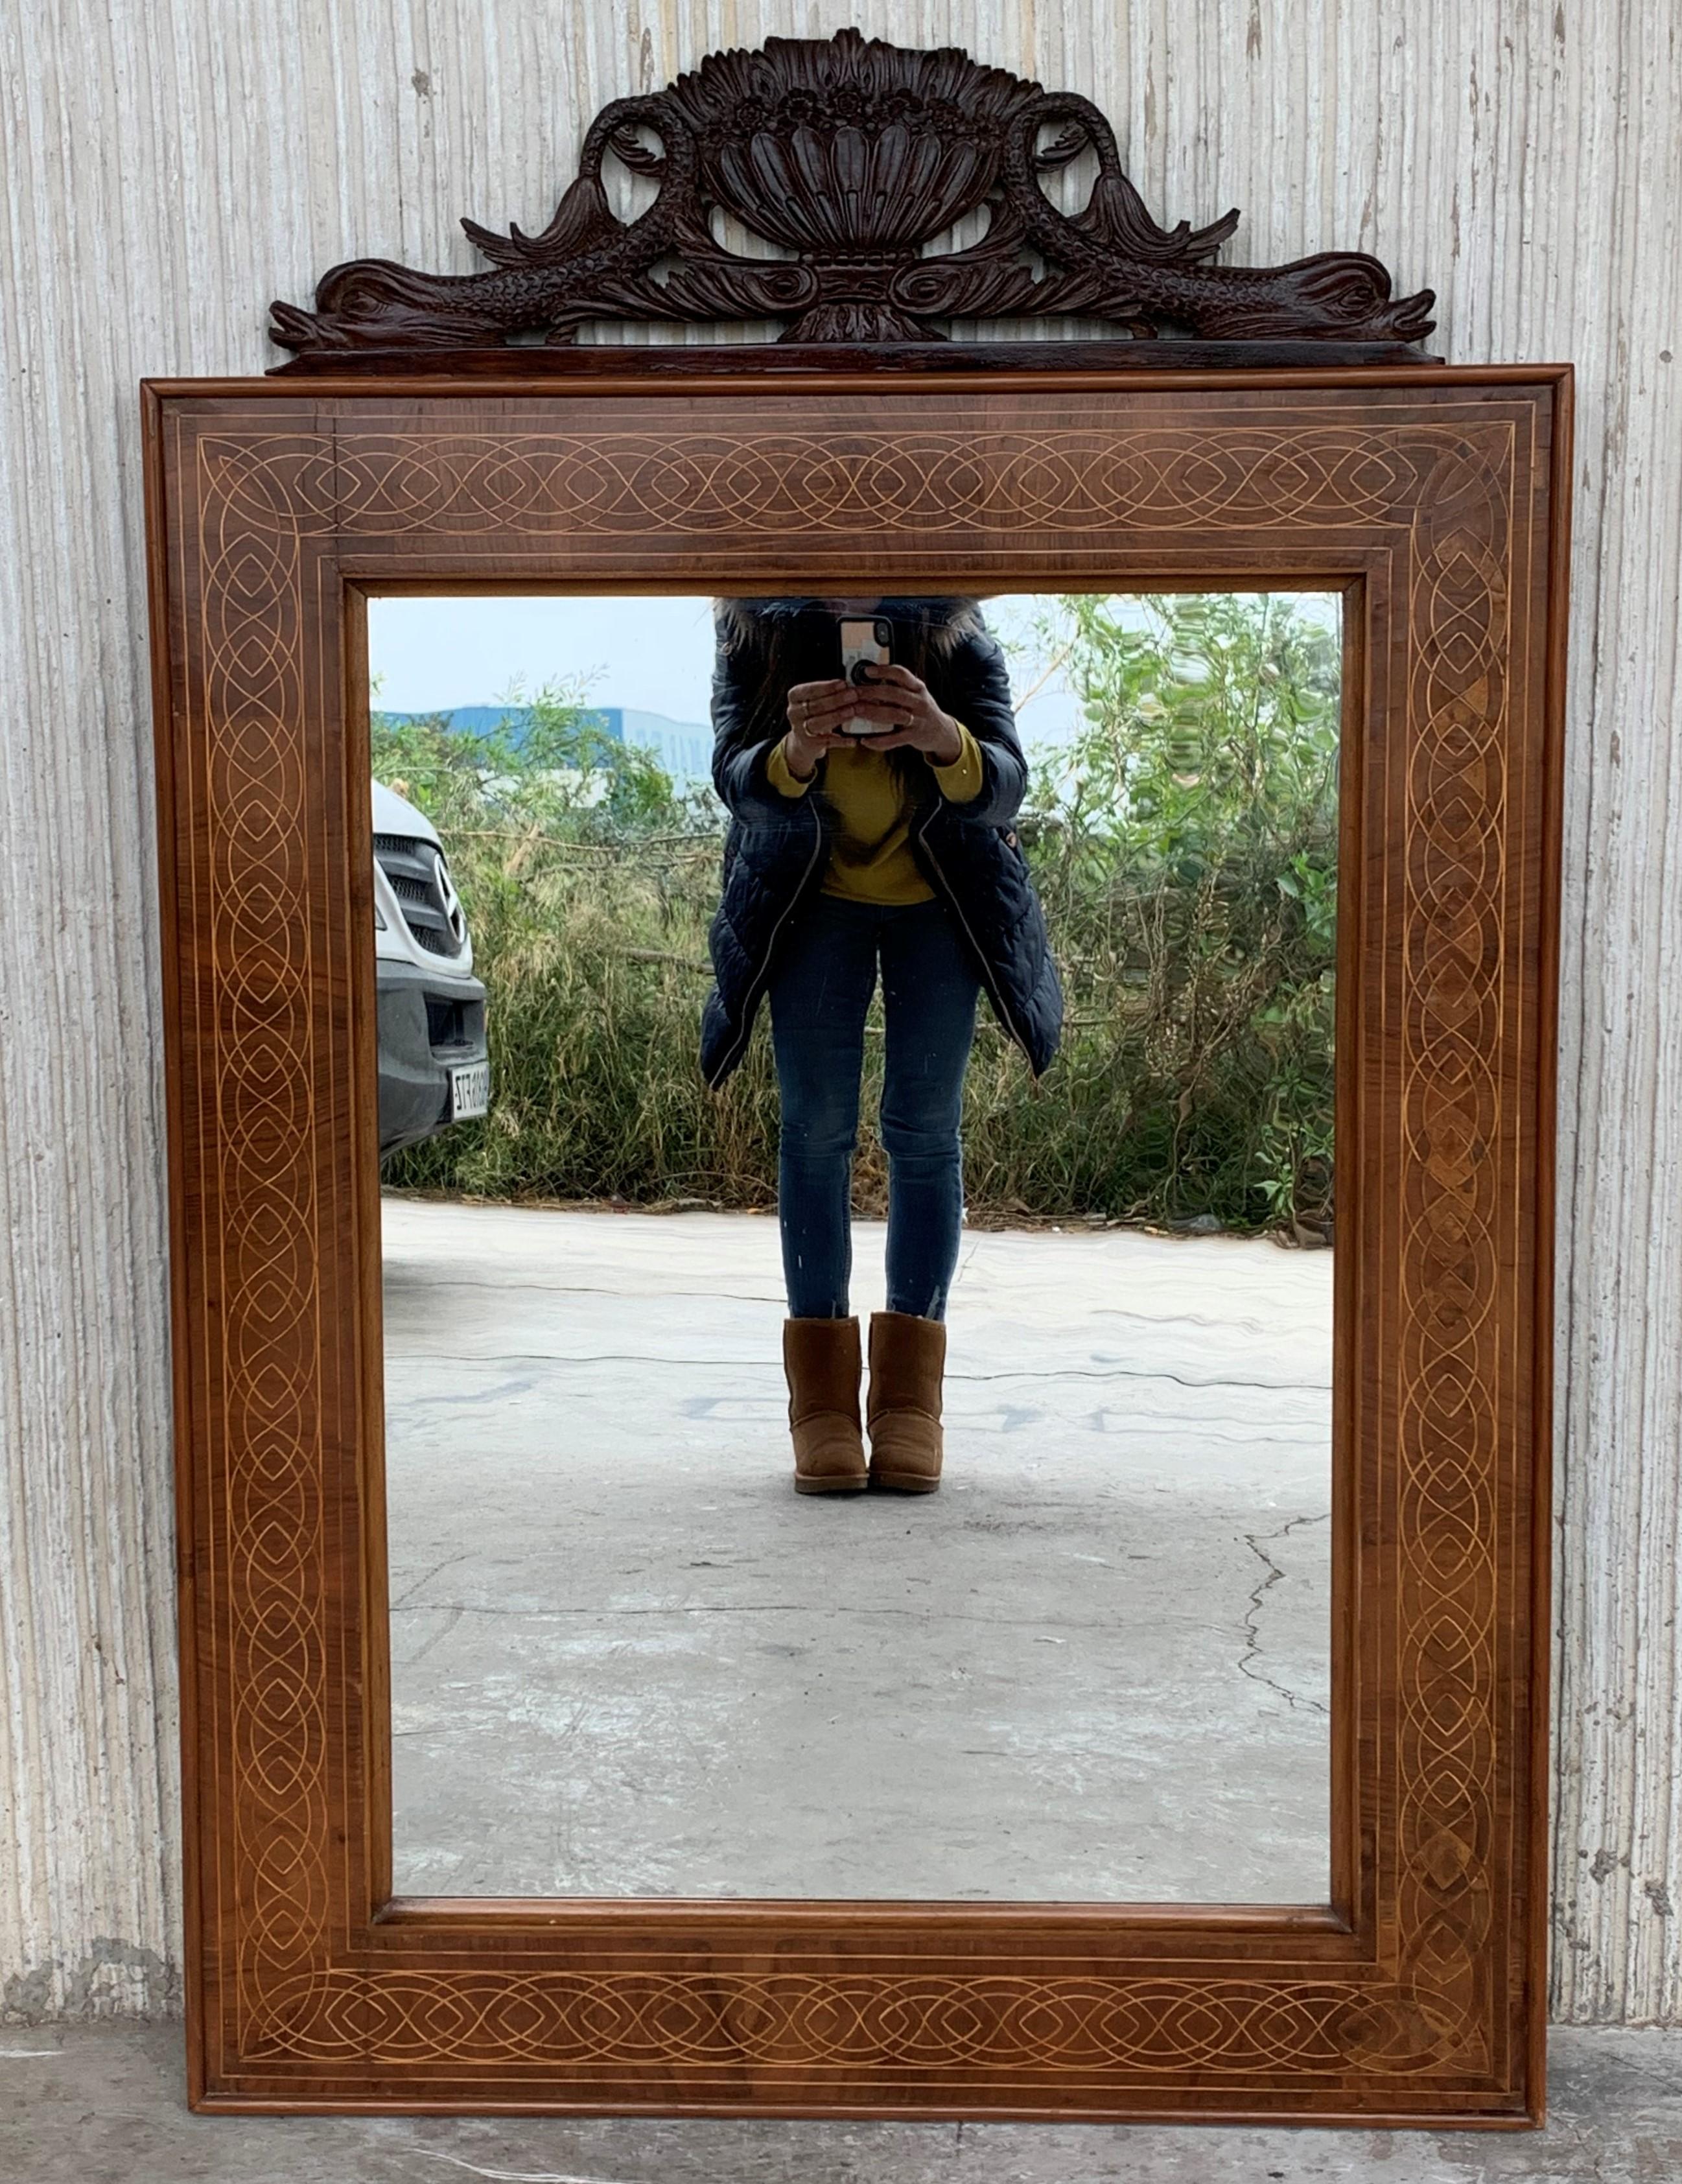 About
This is a beautiful antique Spanish flame mahogany and marquetry wall mirror, circa 1840, 19th century.

The mahogany frame is beautifully inlaid with a continuous marquetry border.

The quality and craftsmanship of this stunning piece is